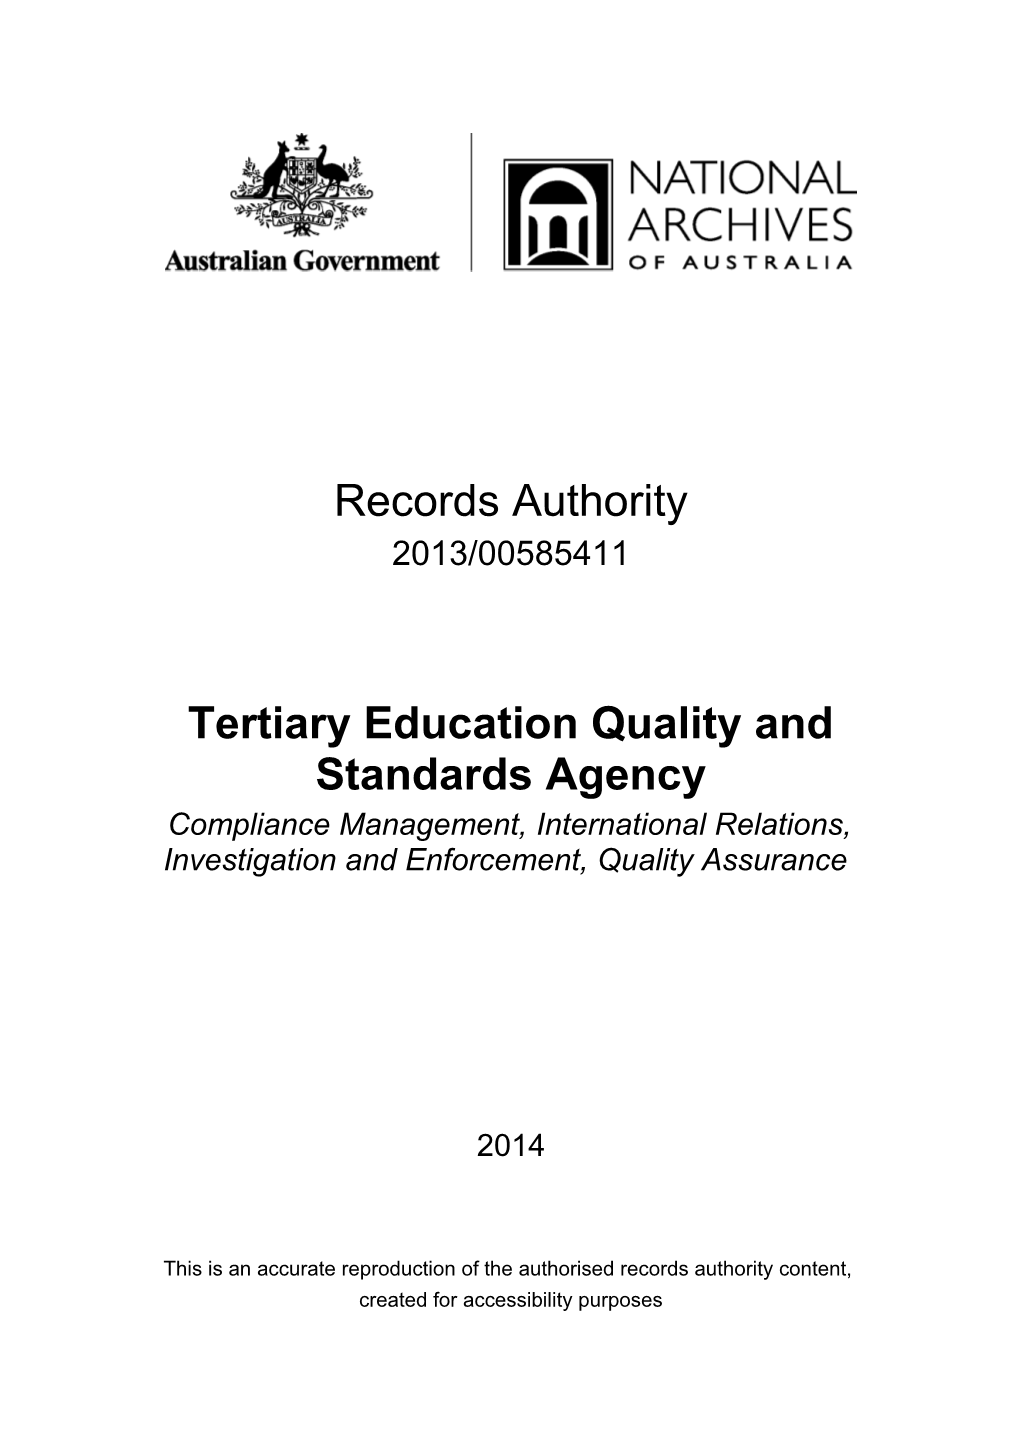 Tertiary Education Quality and Standards Agency (TEQSA) - Records Authority 2013/00585411